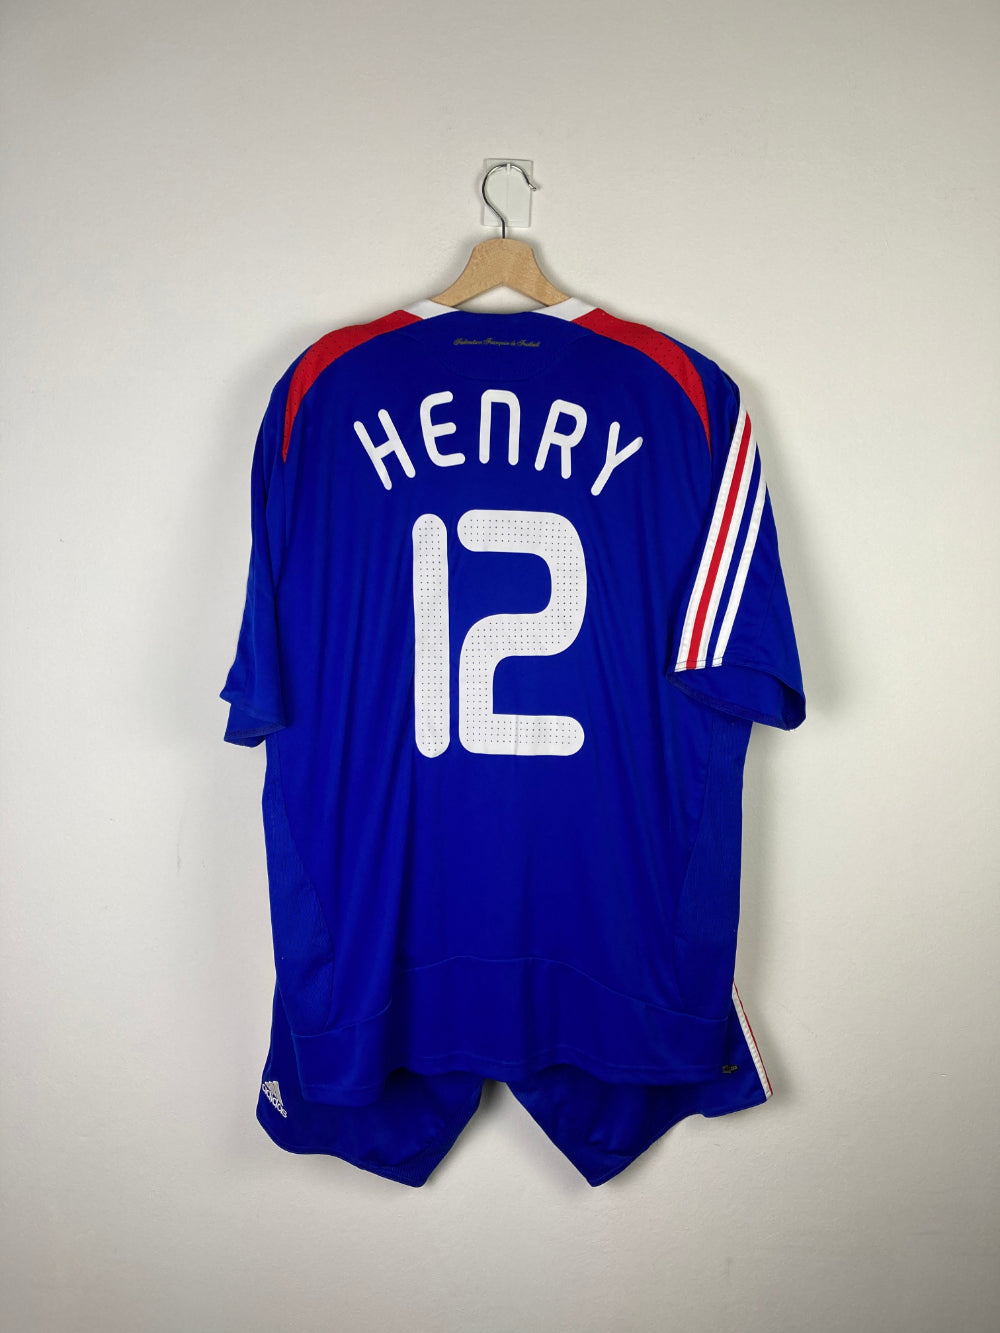 Original France Home Jersey & Short 2007-2008 #12 of Thierry Henry - XL